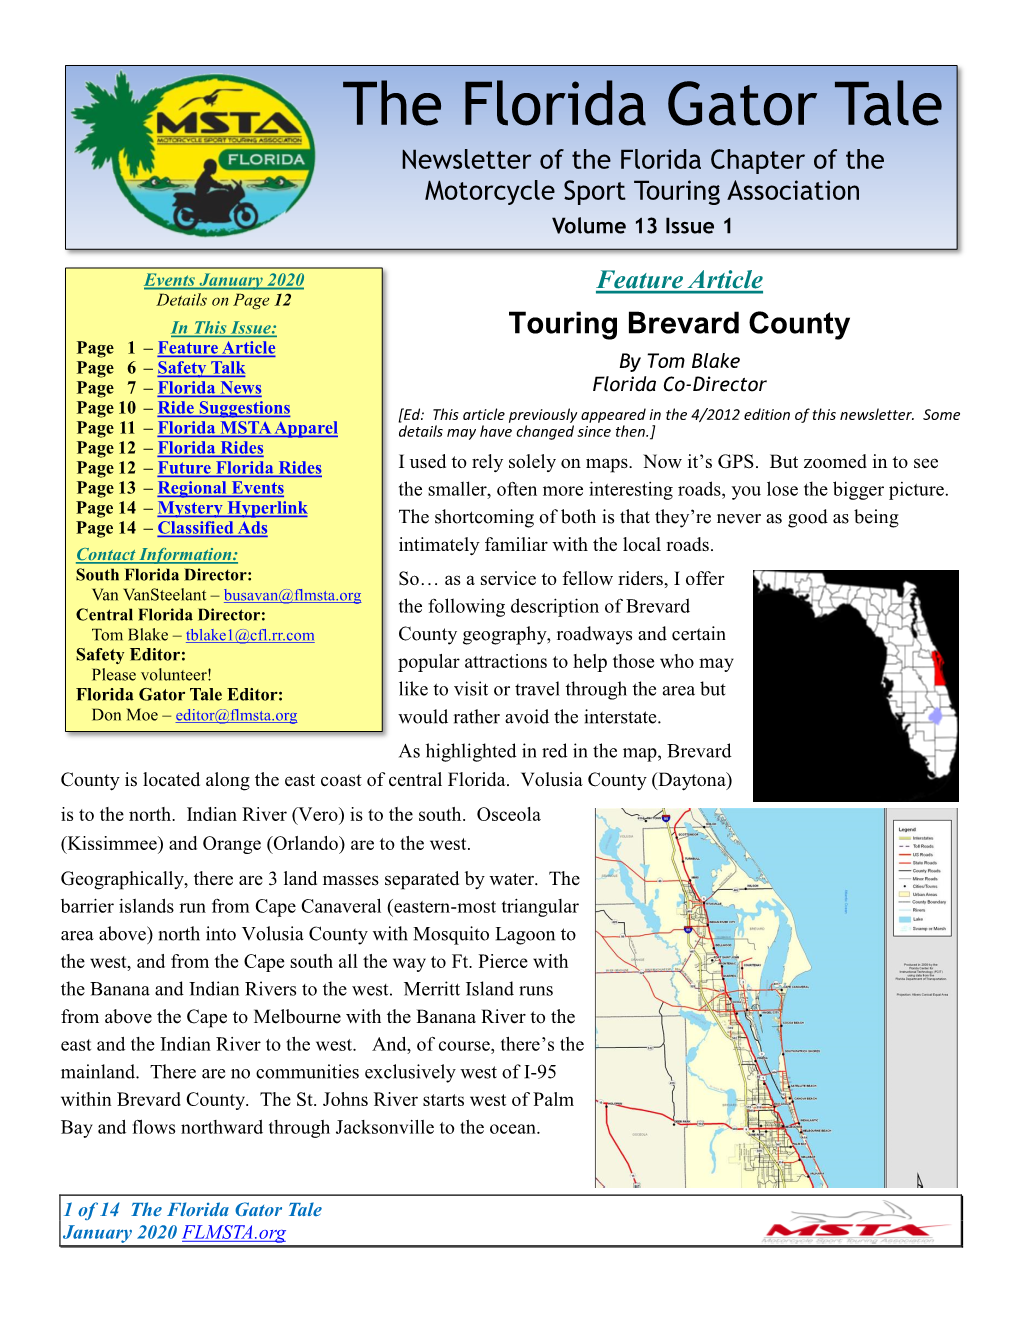 The Florida Gator Tale Newsletter of the Florida Chapter of the Motorcycle Sport Touring Association Volume 13 Issue 1